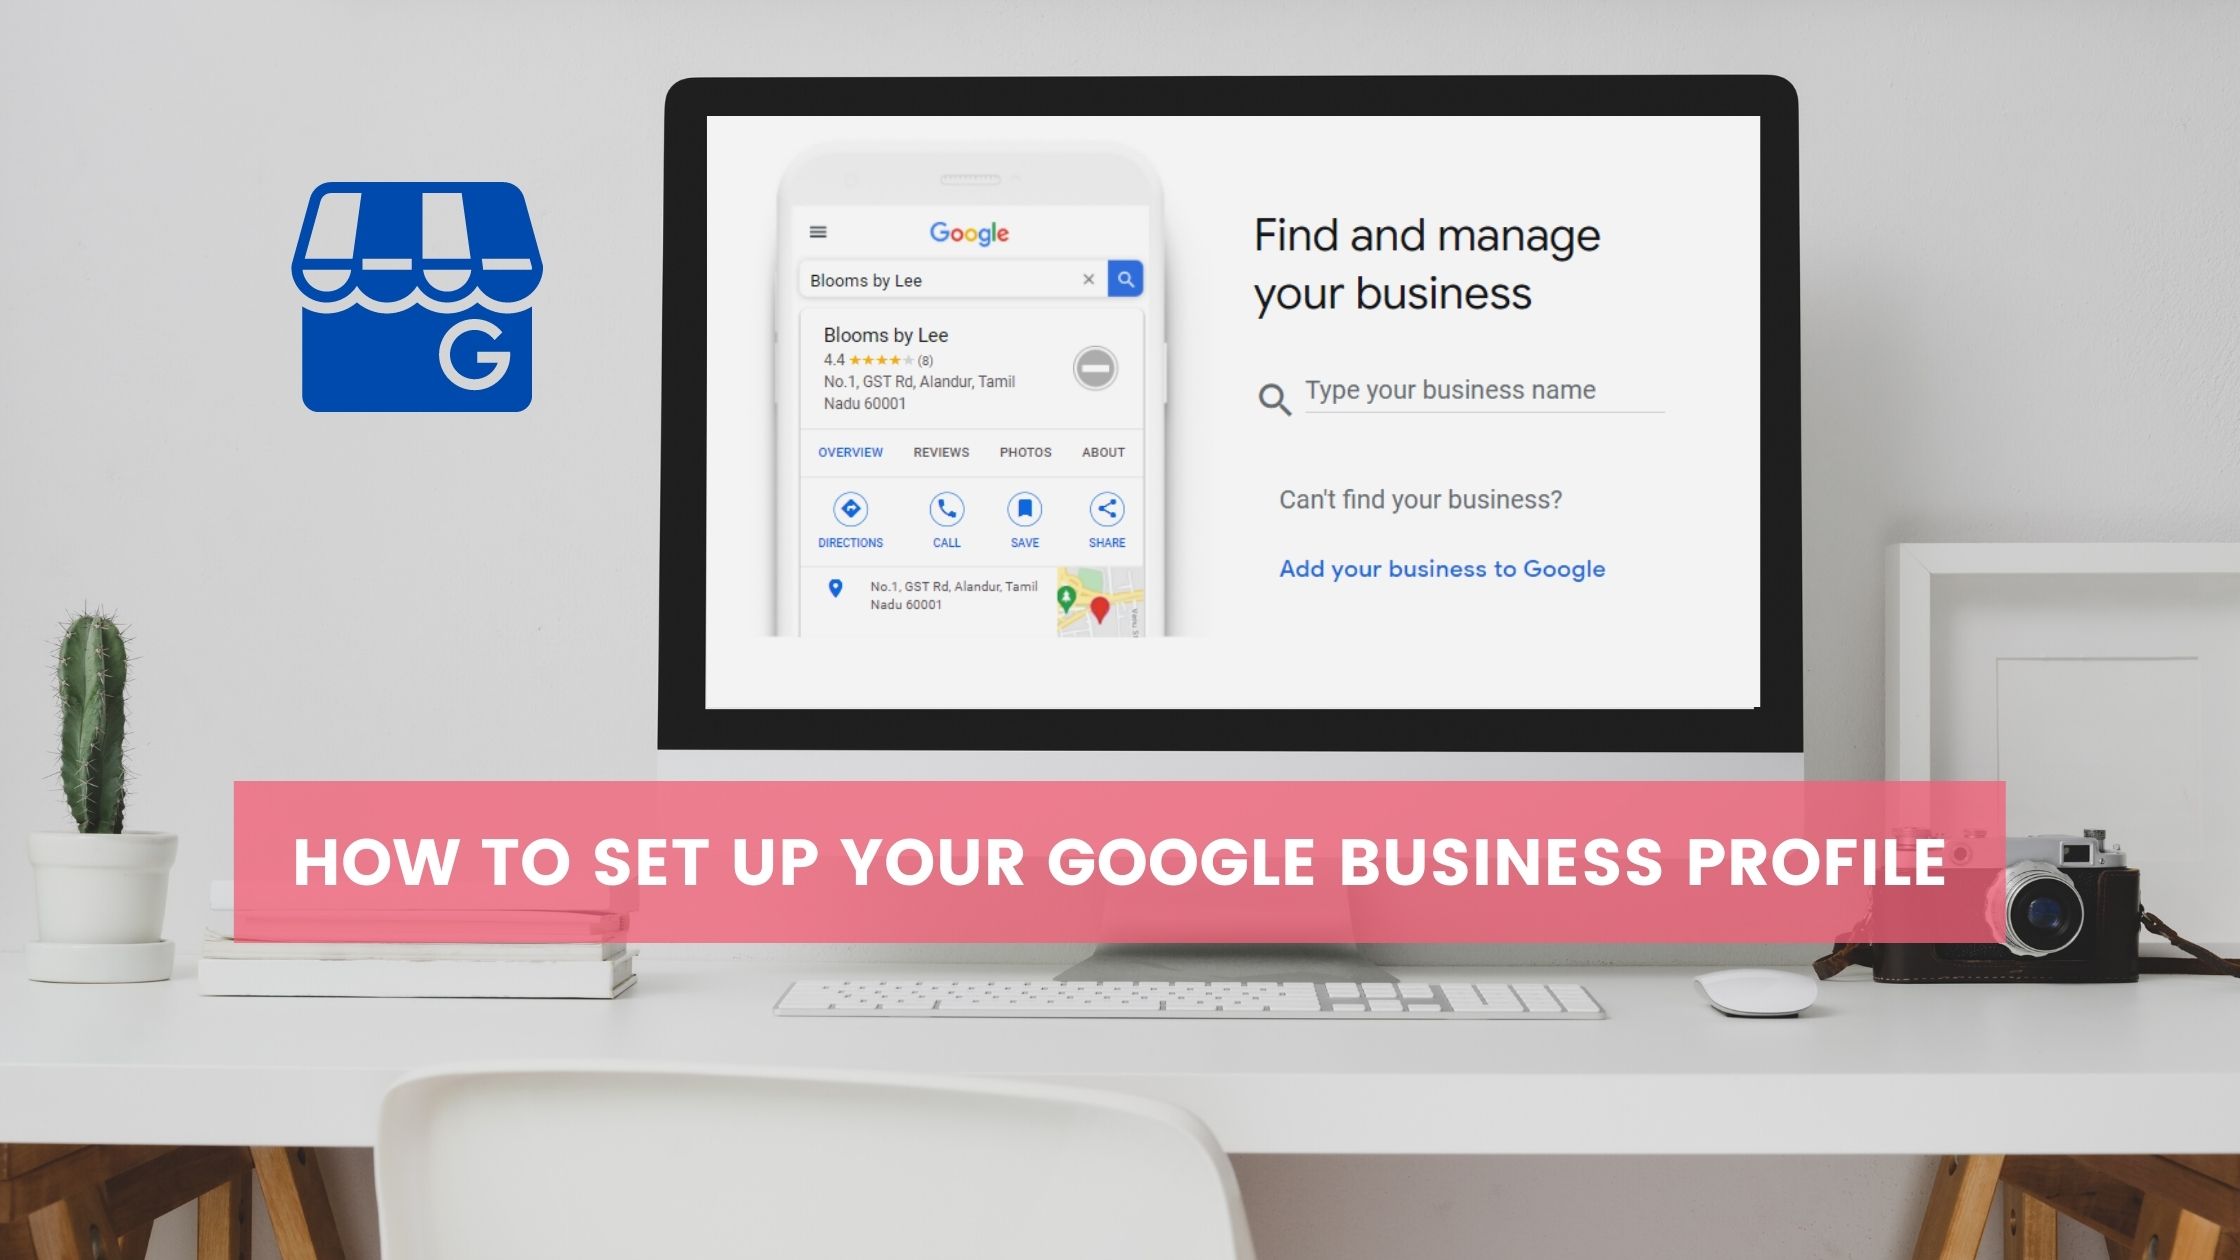 HOW TO SET UP YOUR GOOGLE BUSINESS PROFILE